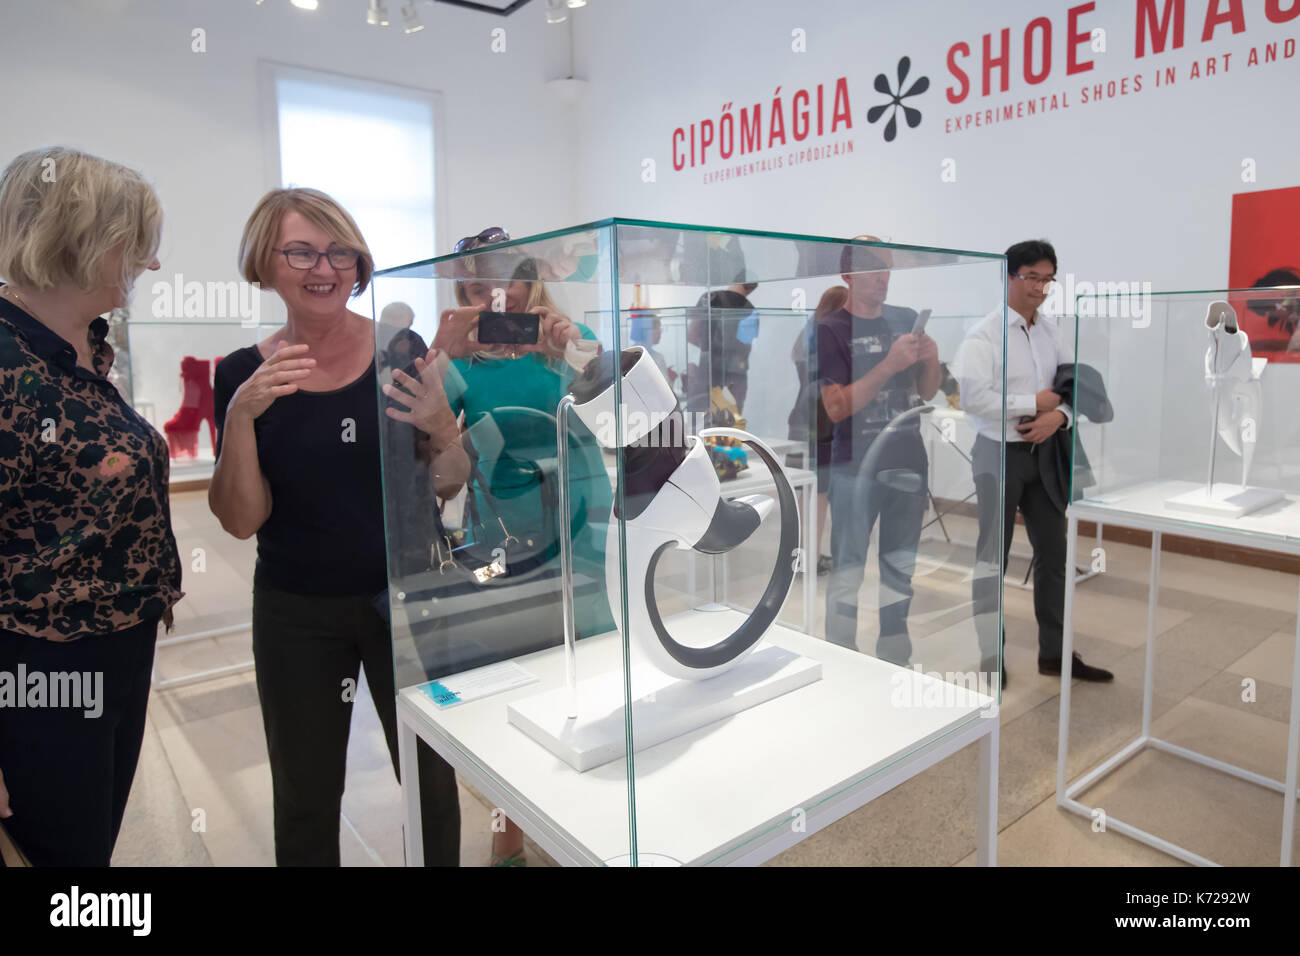 Budapest, Hungary. 14th Sep, 2017. Artwork 'Ring' by Dutch designer Peter Popps is seen on display at the media preview of Shoe Magic experimental shoe design exhibition in Budapest, Hungary on Sept. 14, 2017. The exhibits belong to the Hague Virtual Shoe Museum. Credit: Attila Volgyi/Xinhua/Alamy Live News Stock Photo